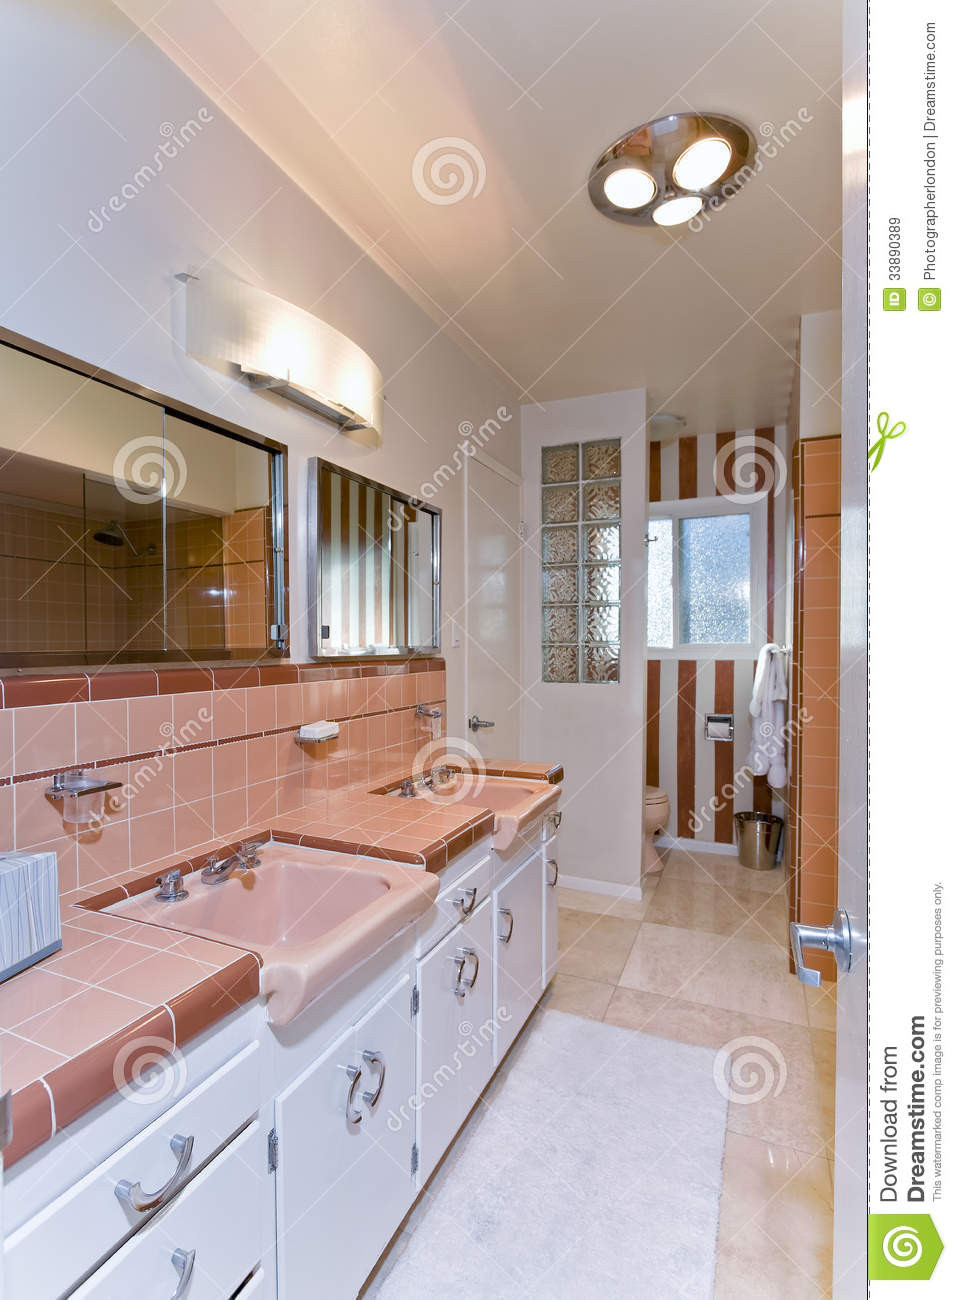 Mirrors Over Bathroom Sinks
 Mirrors Over Sinks In Bathroom Royalty Free Stock